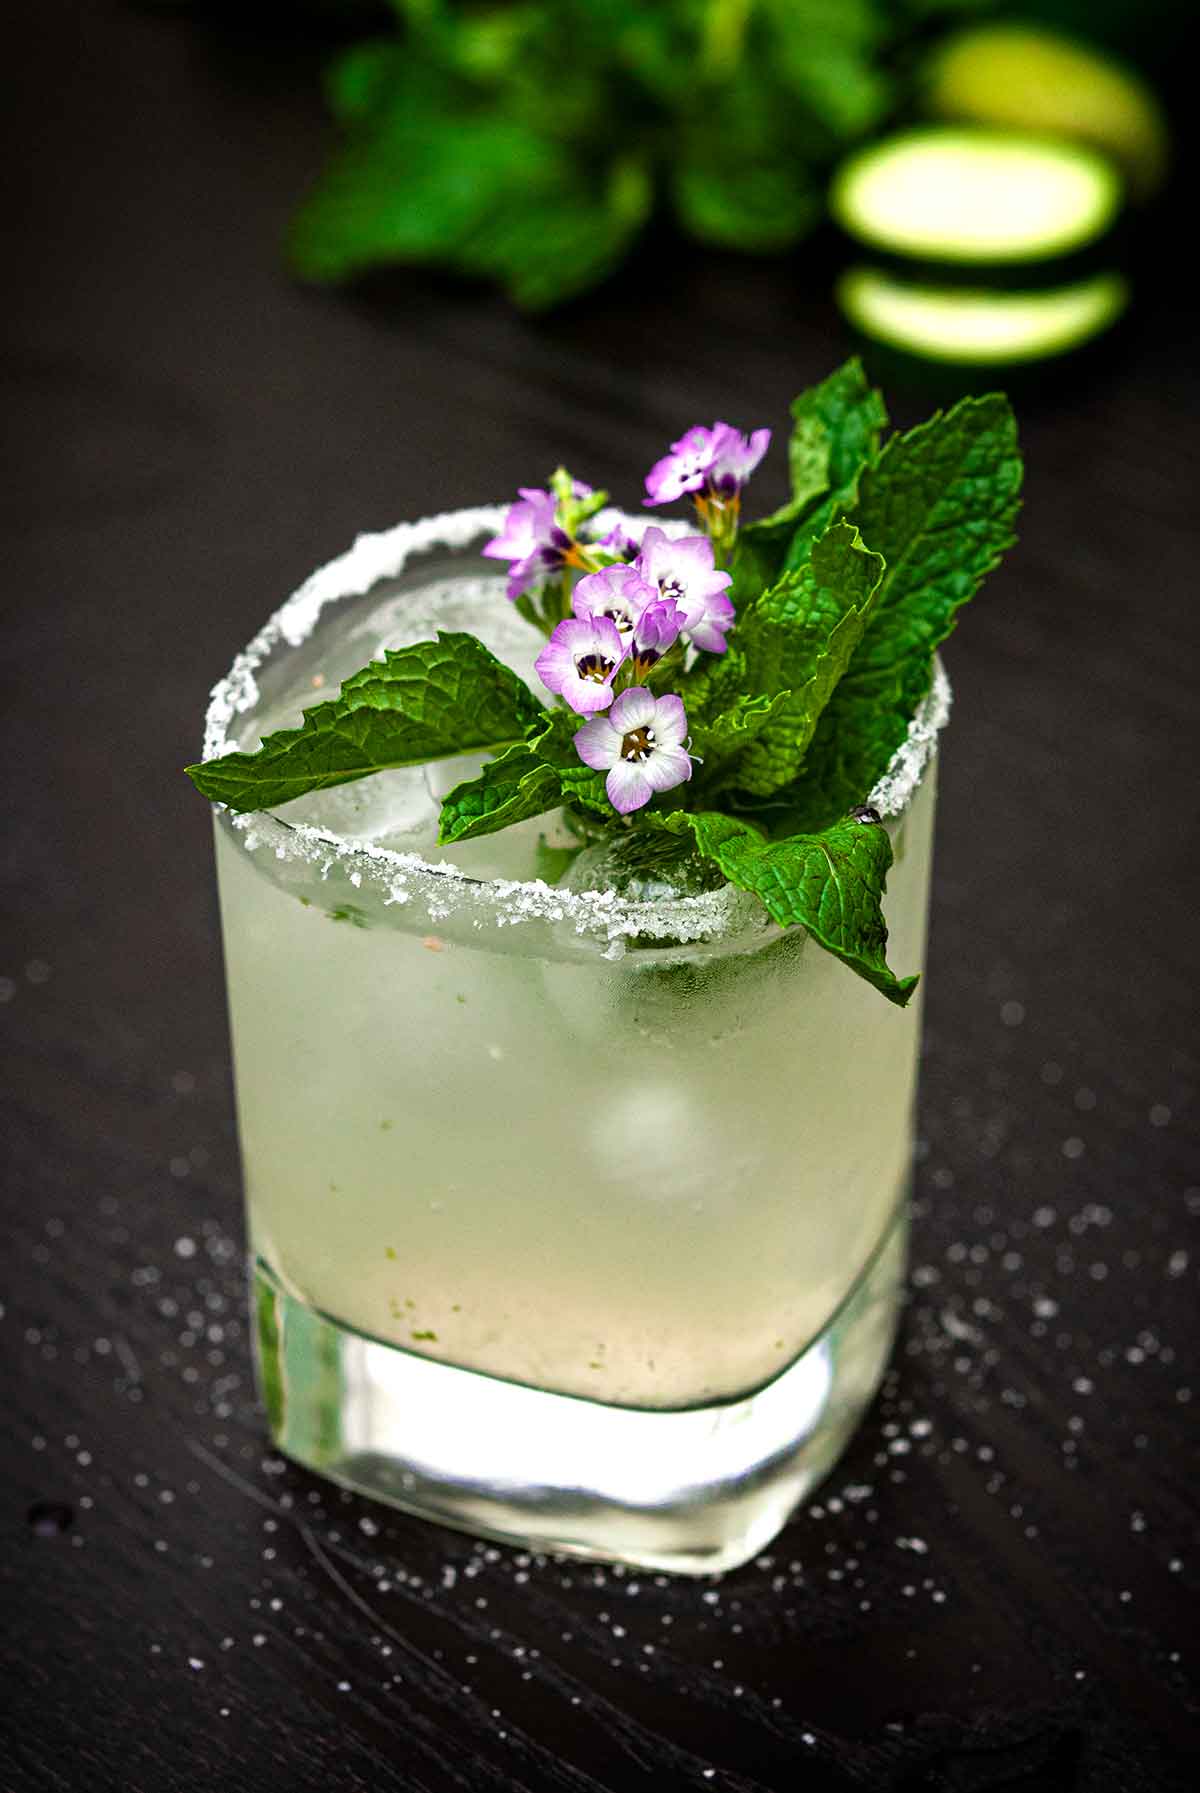 A cucumber mint margarita, garnished with small flowers and mint, on a table lightly sprinkled with salt.